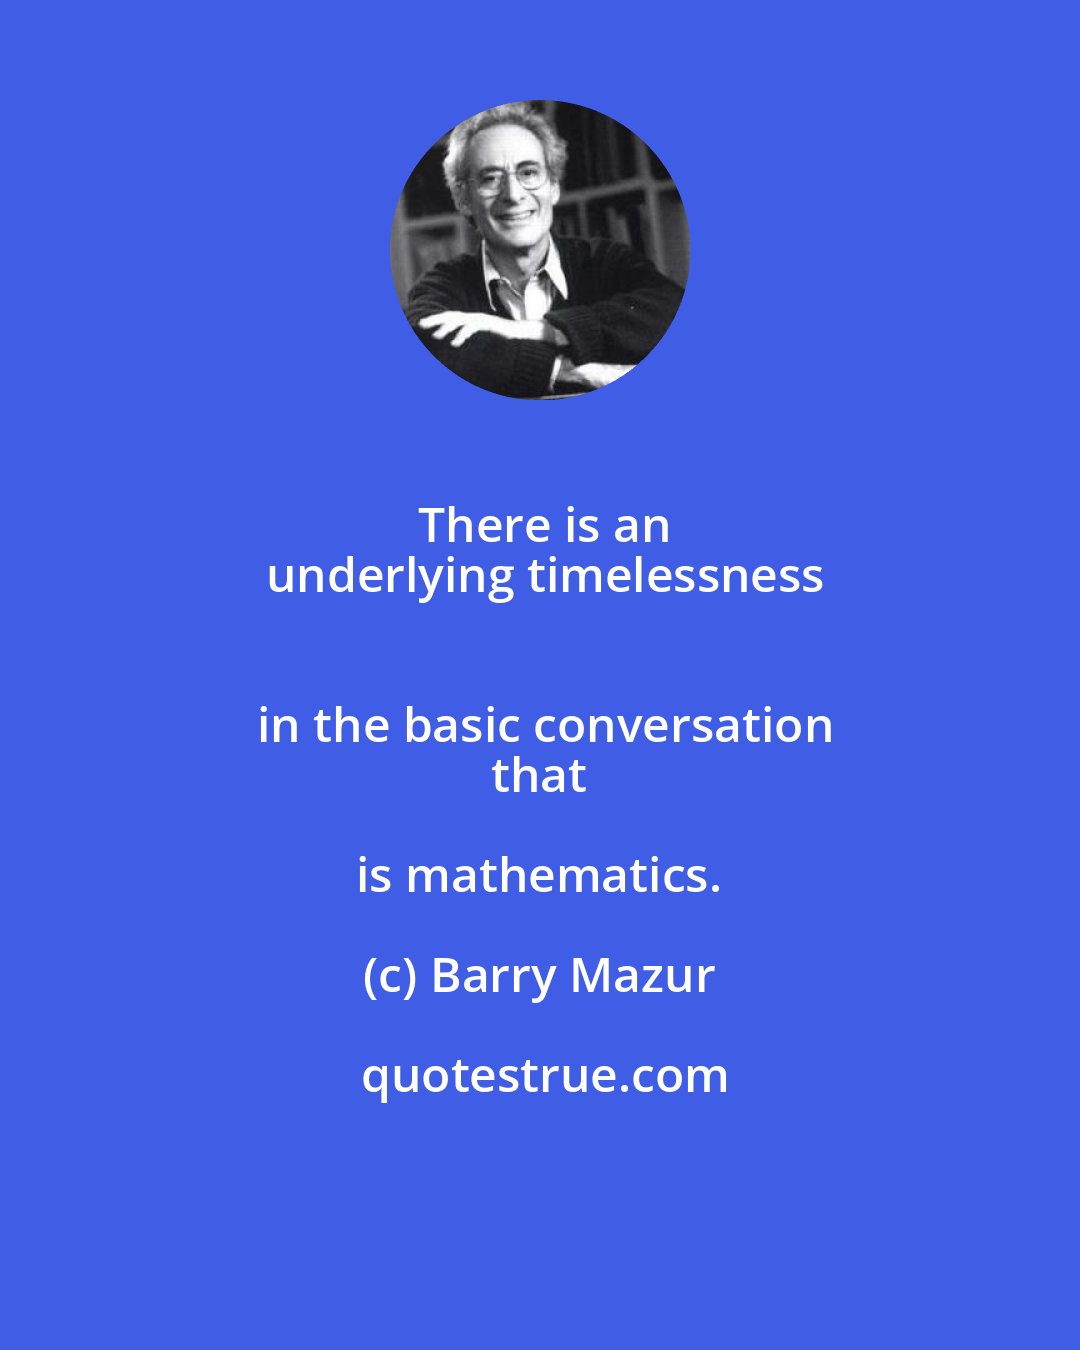 Barry Mazur: There is an
 underlying timelessness
 in the basic conversation
 that is mathematics.